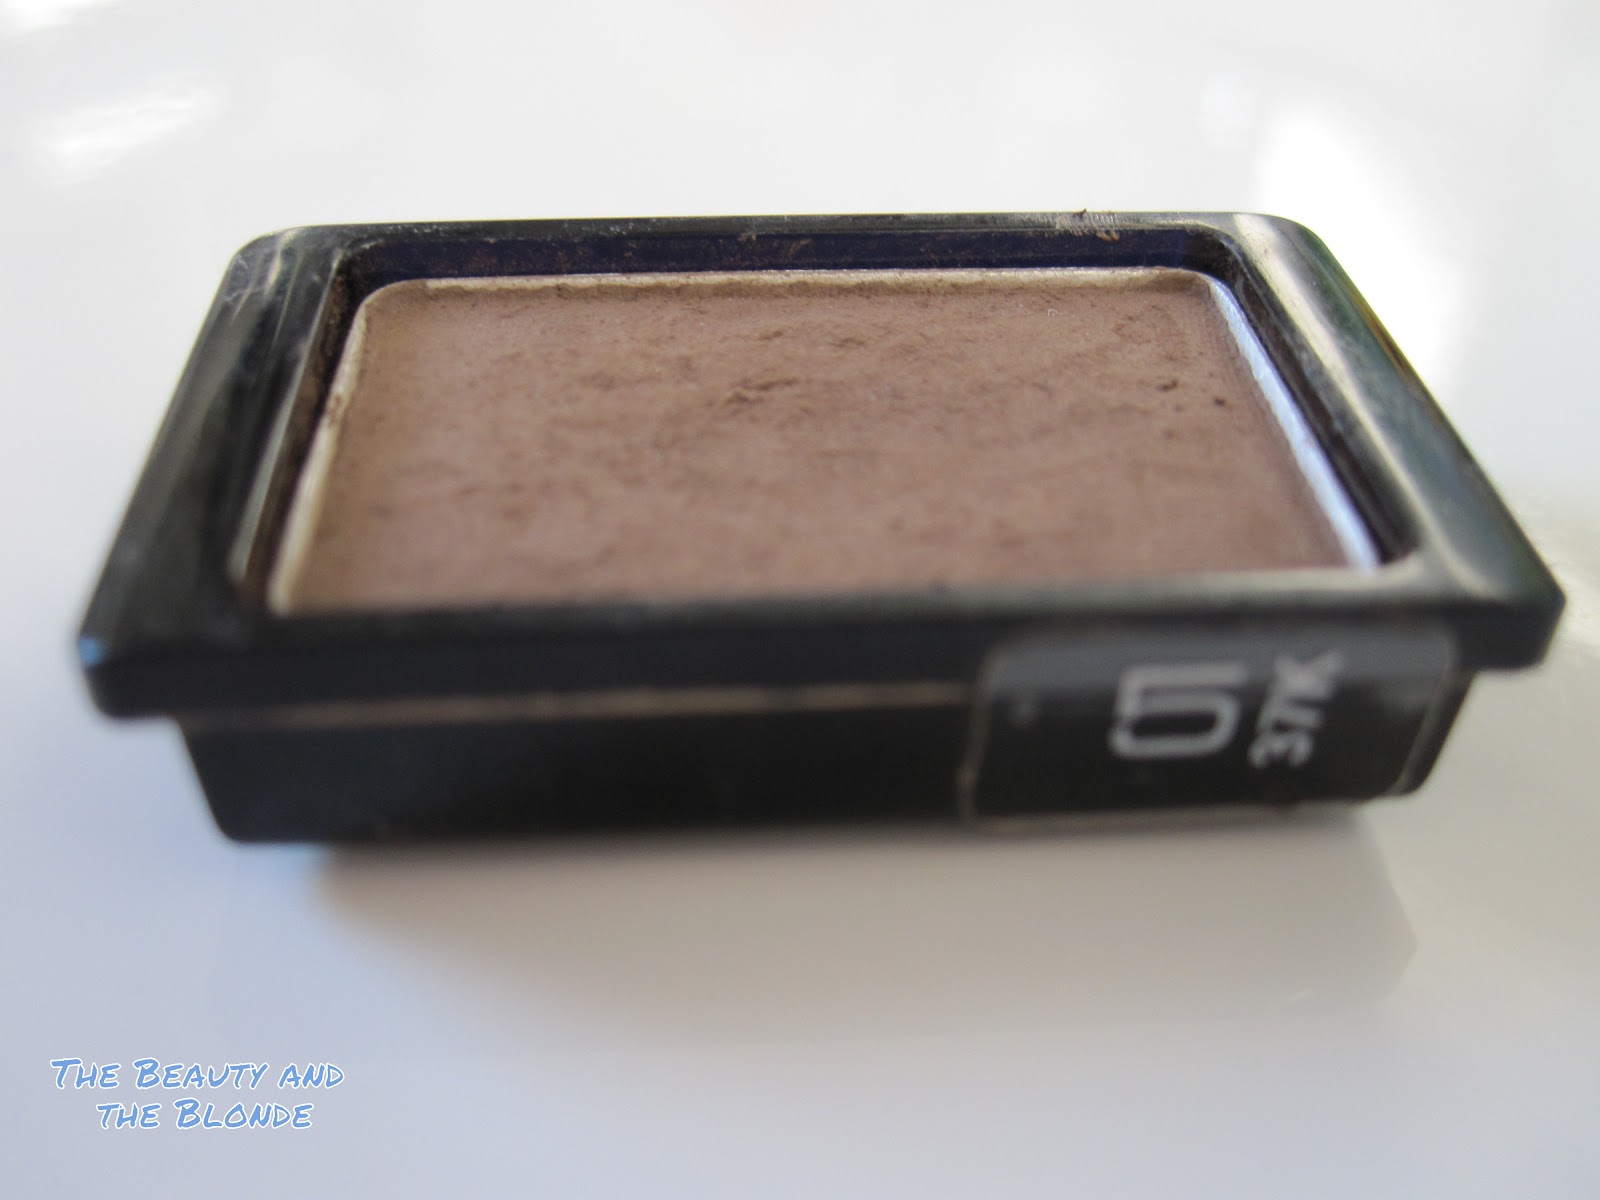 Catrice Eyebrow Set Vs Artdeco Augenbrauenpuder The Beauty And The Blonde